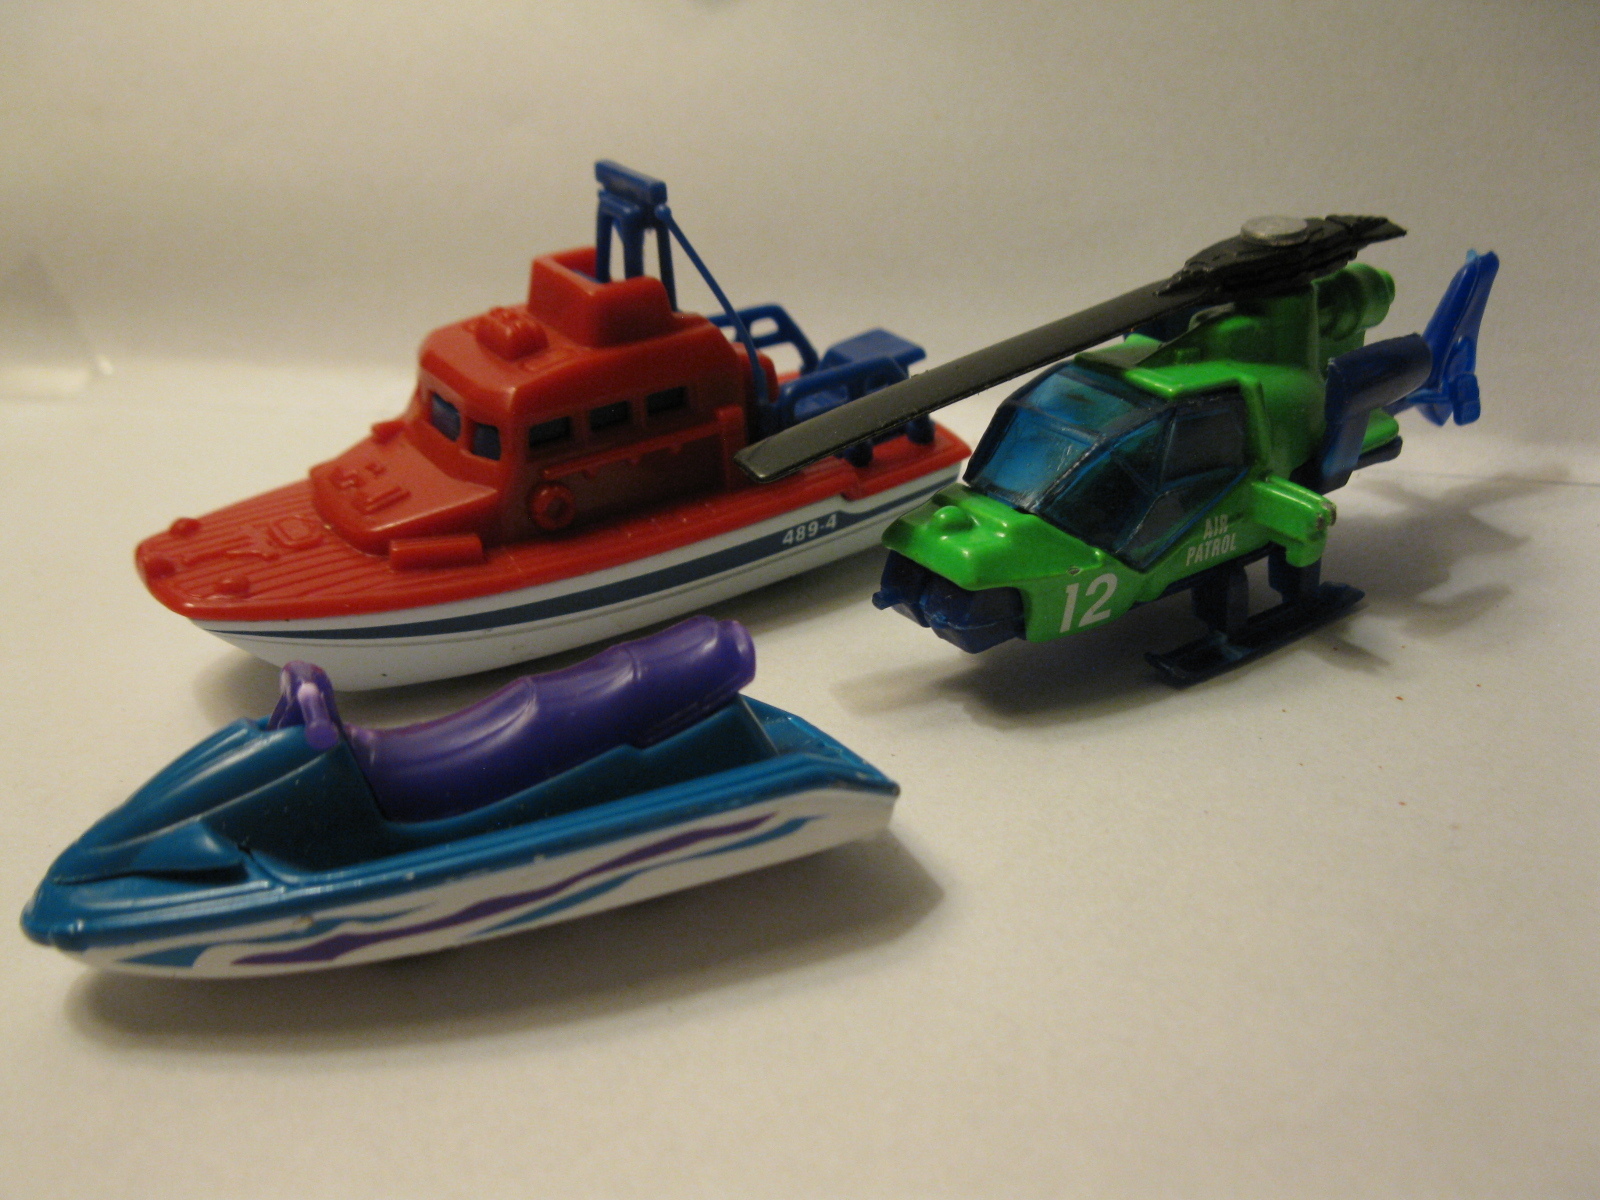 Primary image for lot of 3 diecast vehicles: '98 Sea Rescue boat, '98 Watercraft & '85 Helicopter